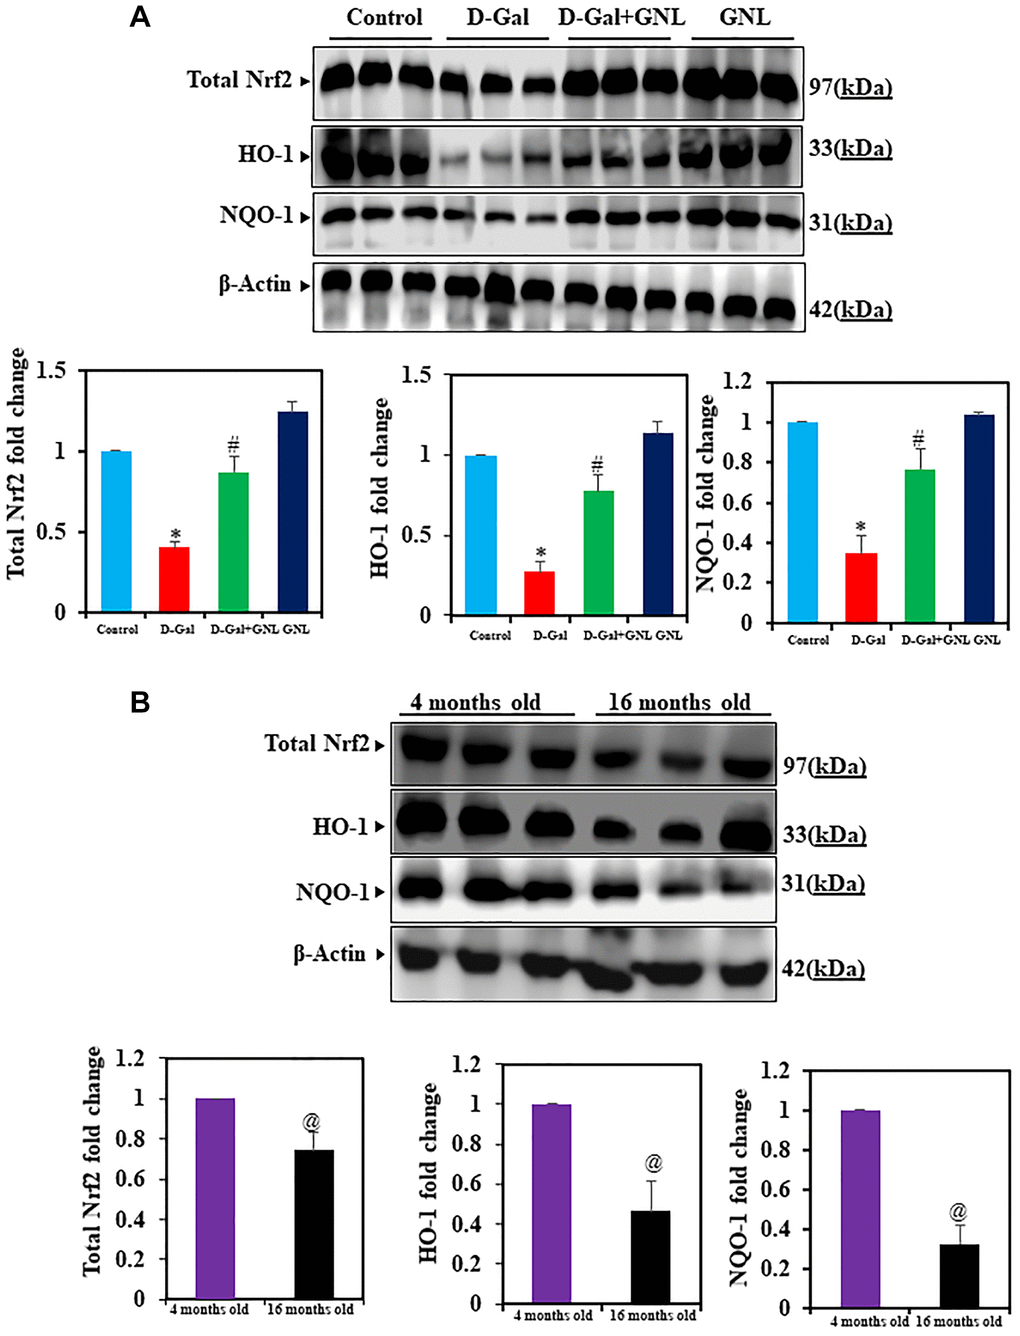 Effect of GNL on D-gal-induced cognitive impairment mice of Nrf2, HO-1, and NQO-1 proteins in the hippocampus. (A) The total Nrf2, HO-1, and NQO-1 protein levels were analyzed by Western blot. Three independent experiments are shown here. SDS-PAGE resolved the protein from each sample, and Western blots were done. The internal load controllers were β-actin. Densitometry analysis calculated changes in protein bands as 1.0-fold, as shown below the gel. (B) 4-month-old young control and 16-month-old mice hippocampus tissue were analyzed for total Nrf2, HO-1, and NQO-1. The internal load controllers were β-actin. Densitometry analysis calculated changes in protein bands as 1.0-fold, as shown on the right side of the gel. Values are expressed as the mean ± SD (n = 6). *P #P @P 